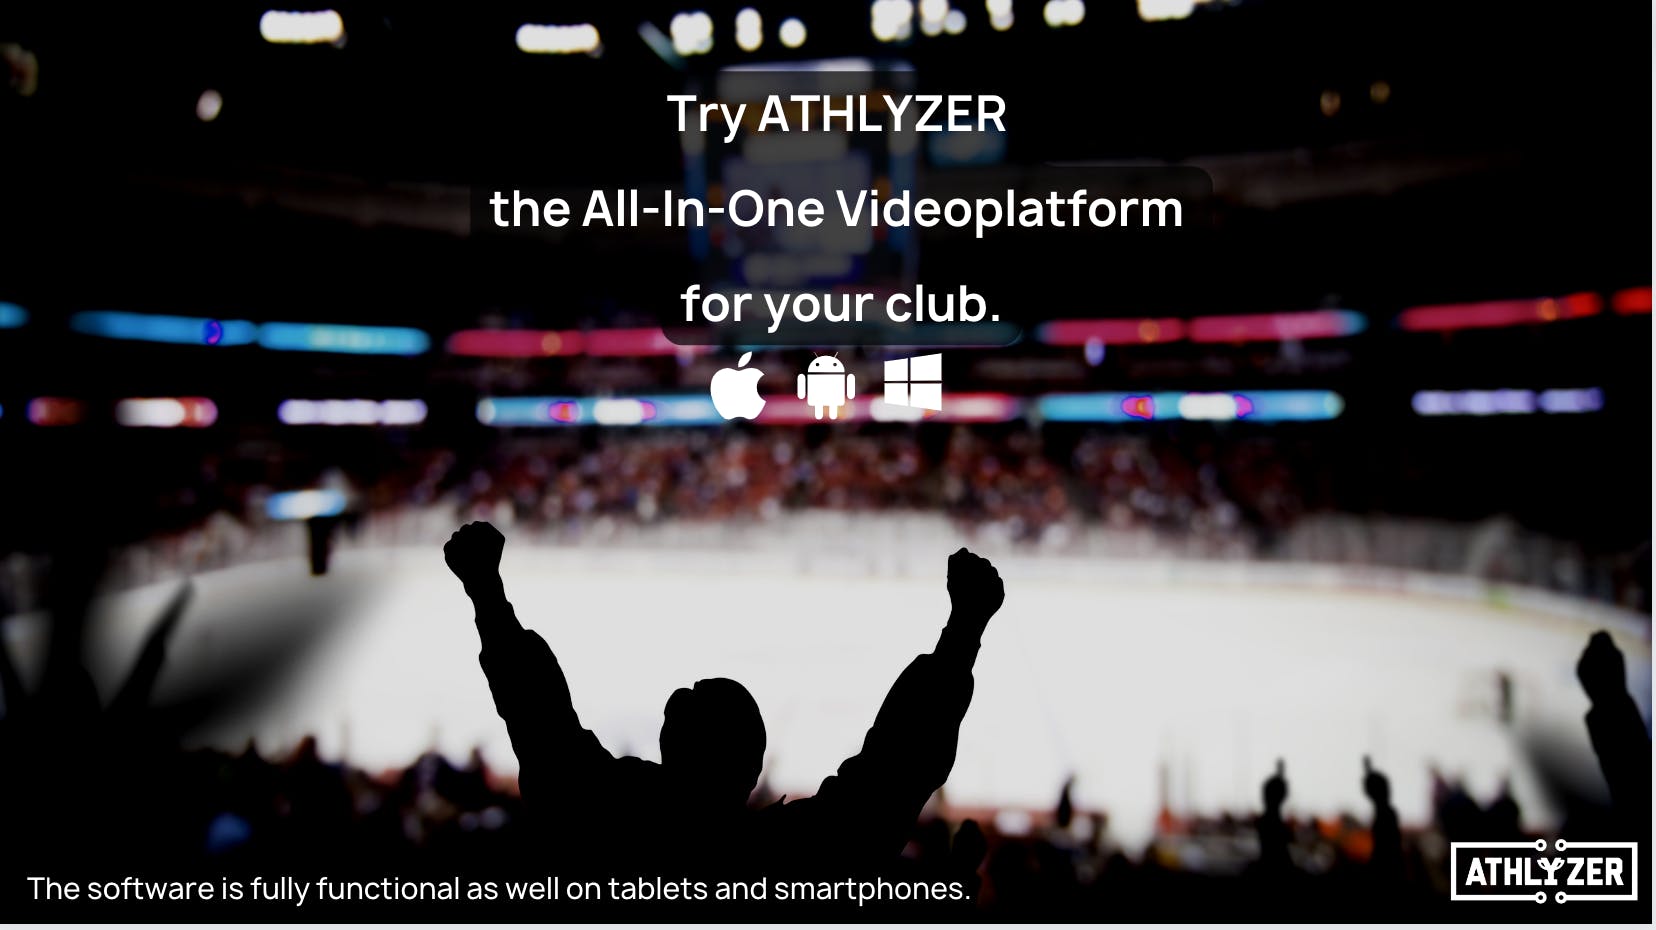 ATHLYZERcoach the all-in-one-plattform for sports clubs using Apple, Windows or Android devices - up to 3 at the same time.